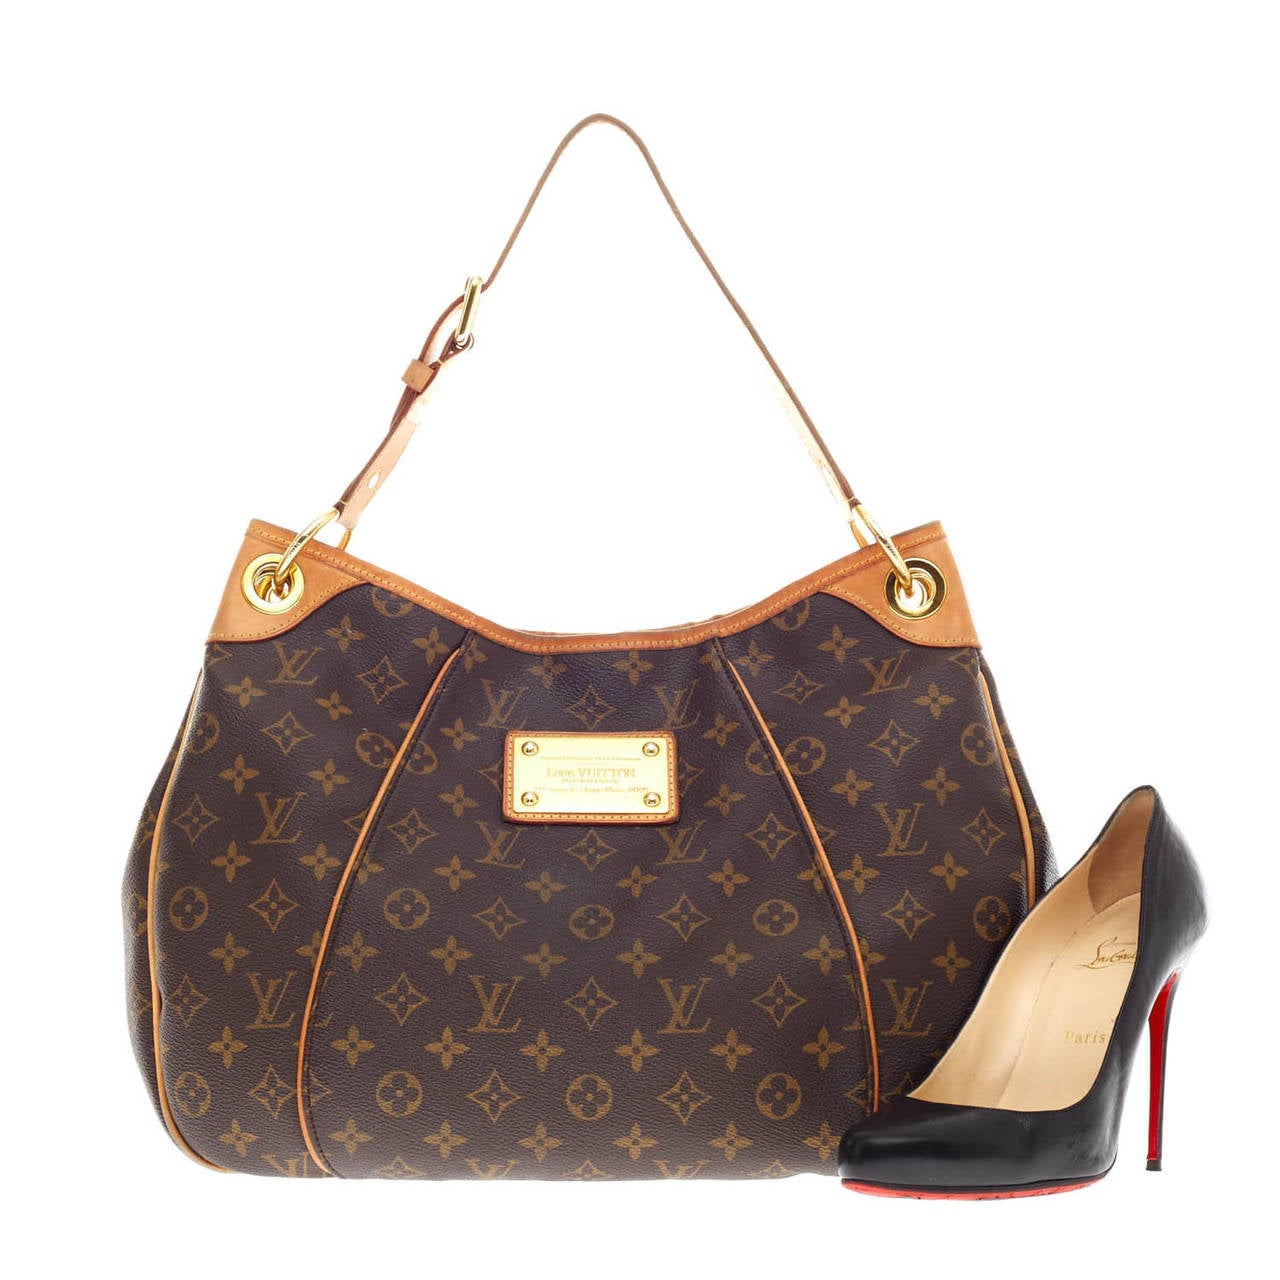 This authentic Louis Vuitton Galliera Monogram Canvas in size PM is a bag that is as practical as it is iconic. Crafted from Louis Vuitton's signature monogram print canvas, this bag features cowhide leather trims, gold-tone hardware, protective